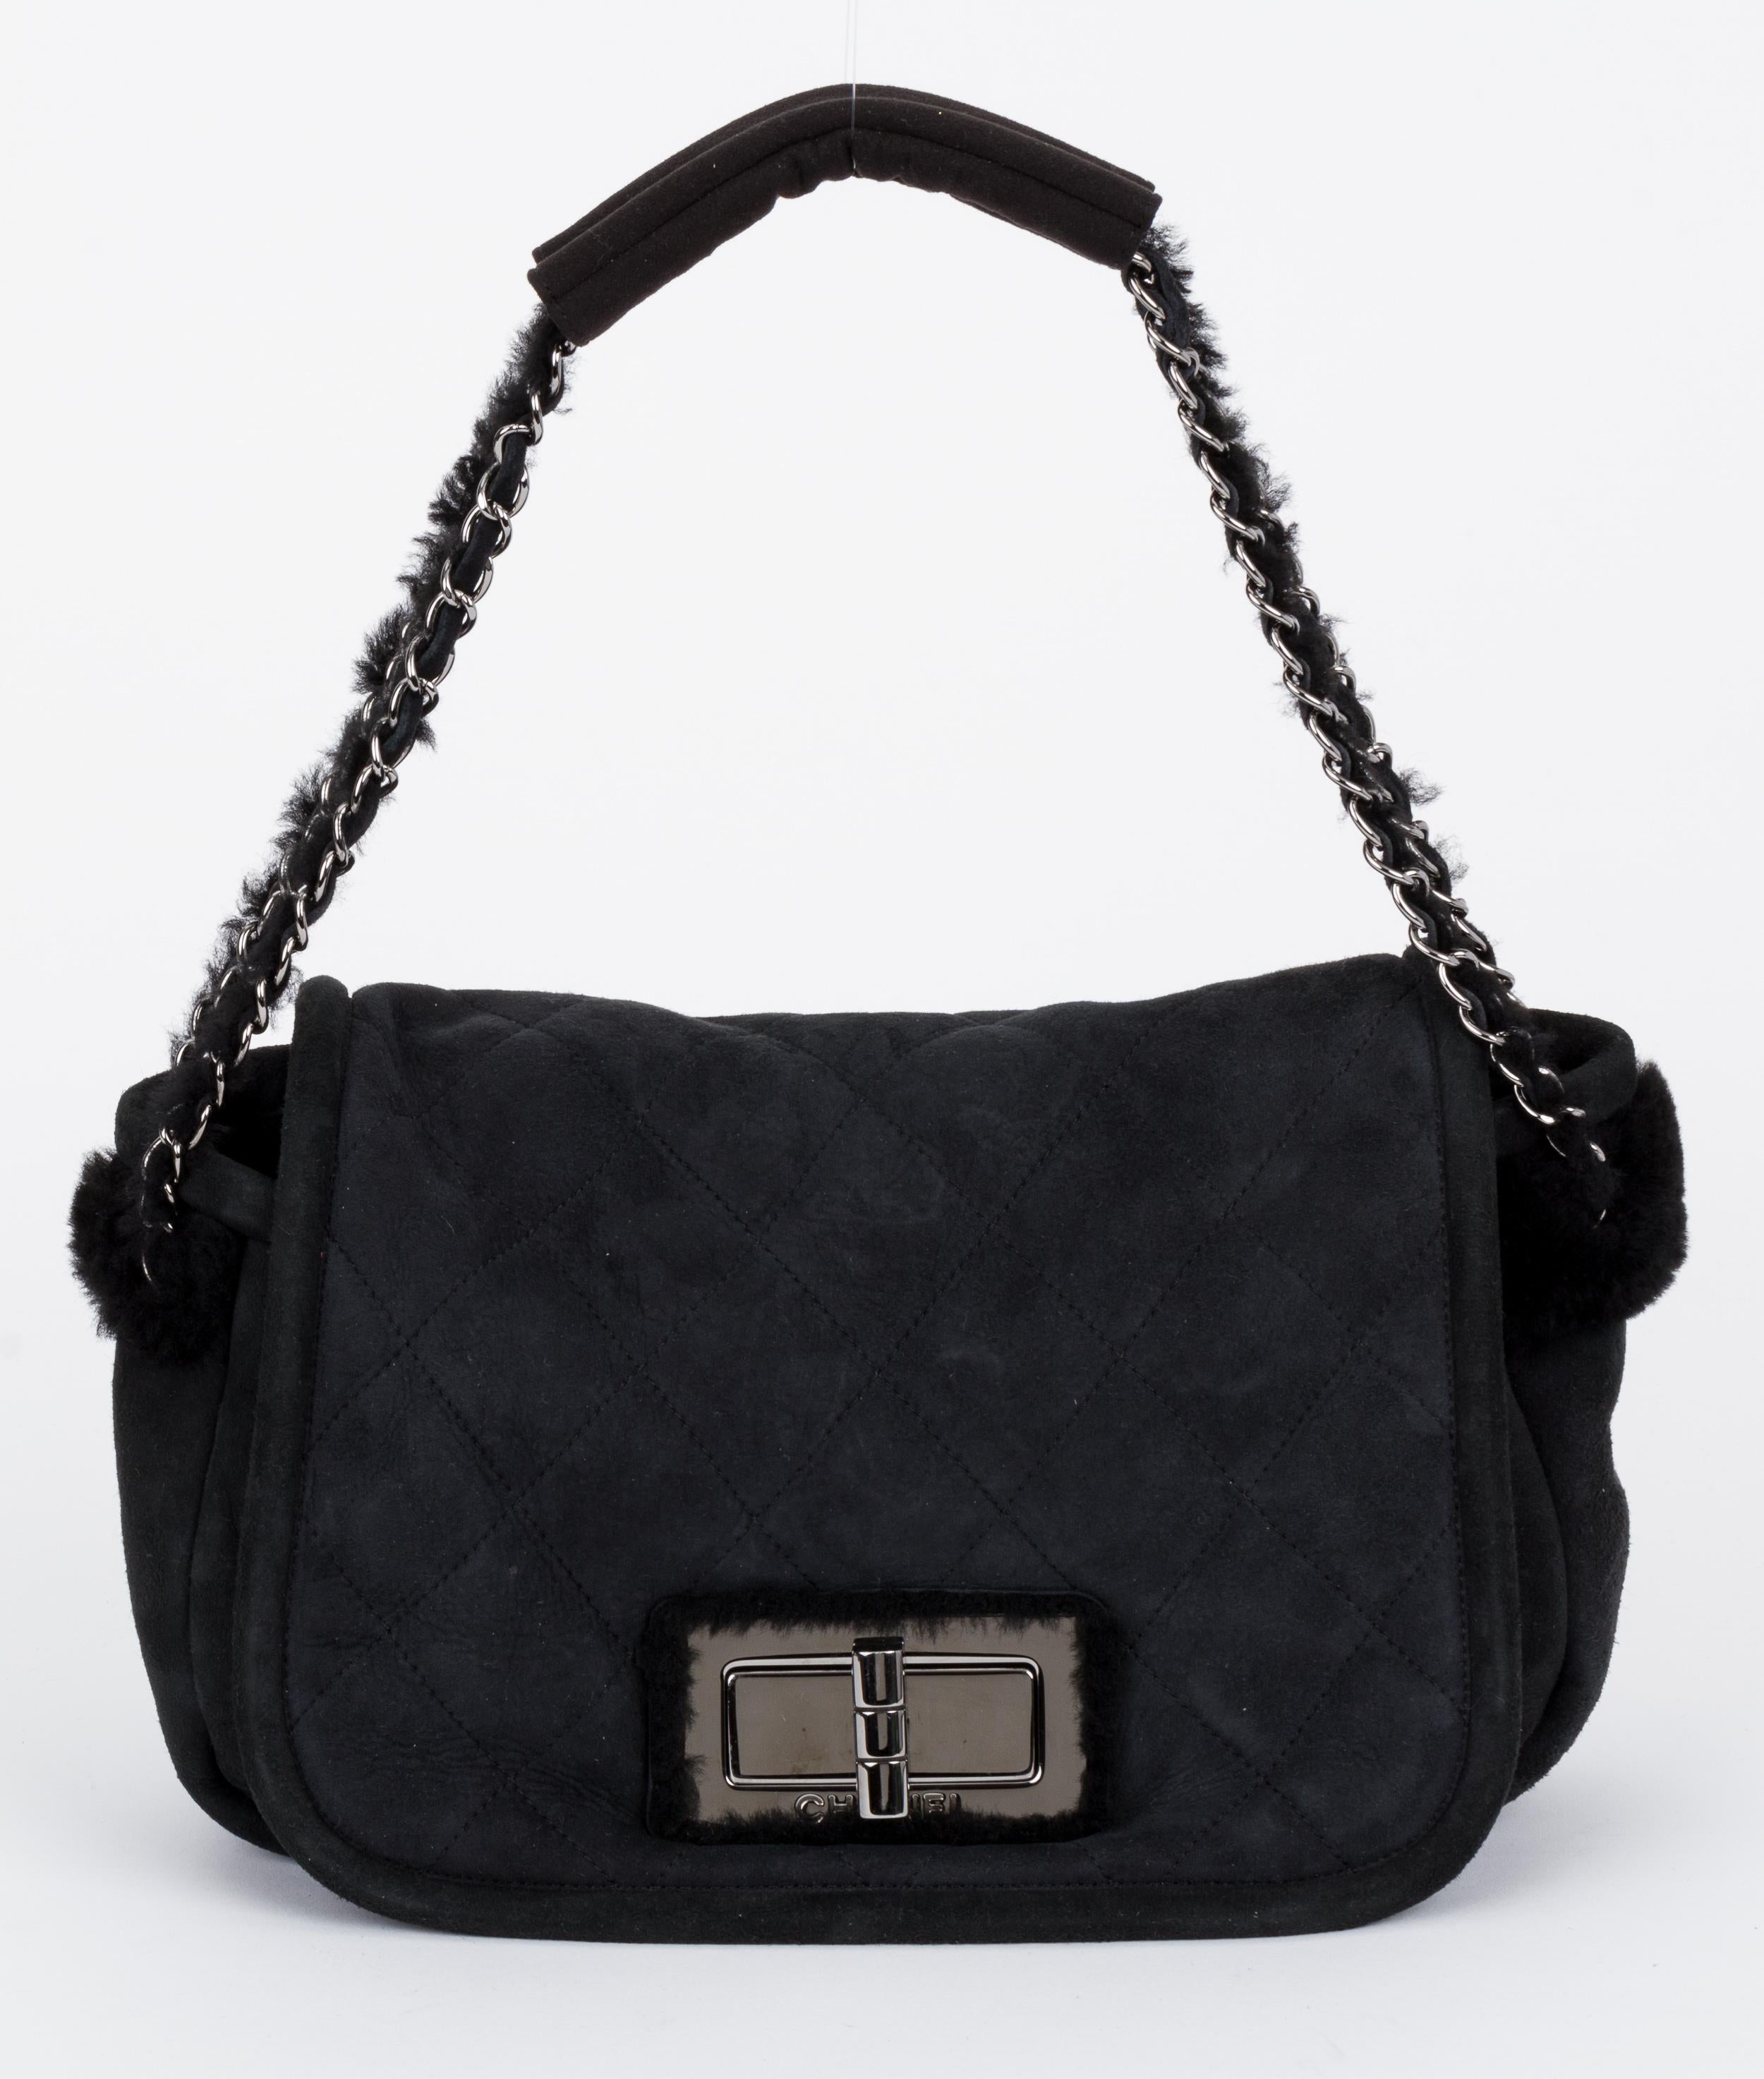 Chanel black shearling shoulder tote with ruthenium hardware. Handle drop 10